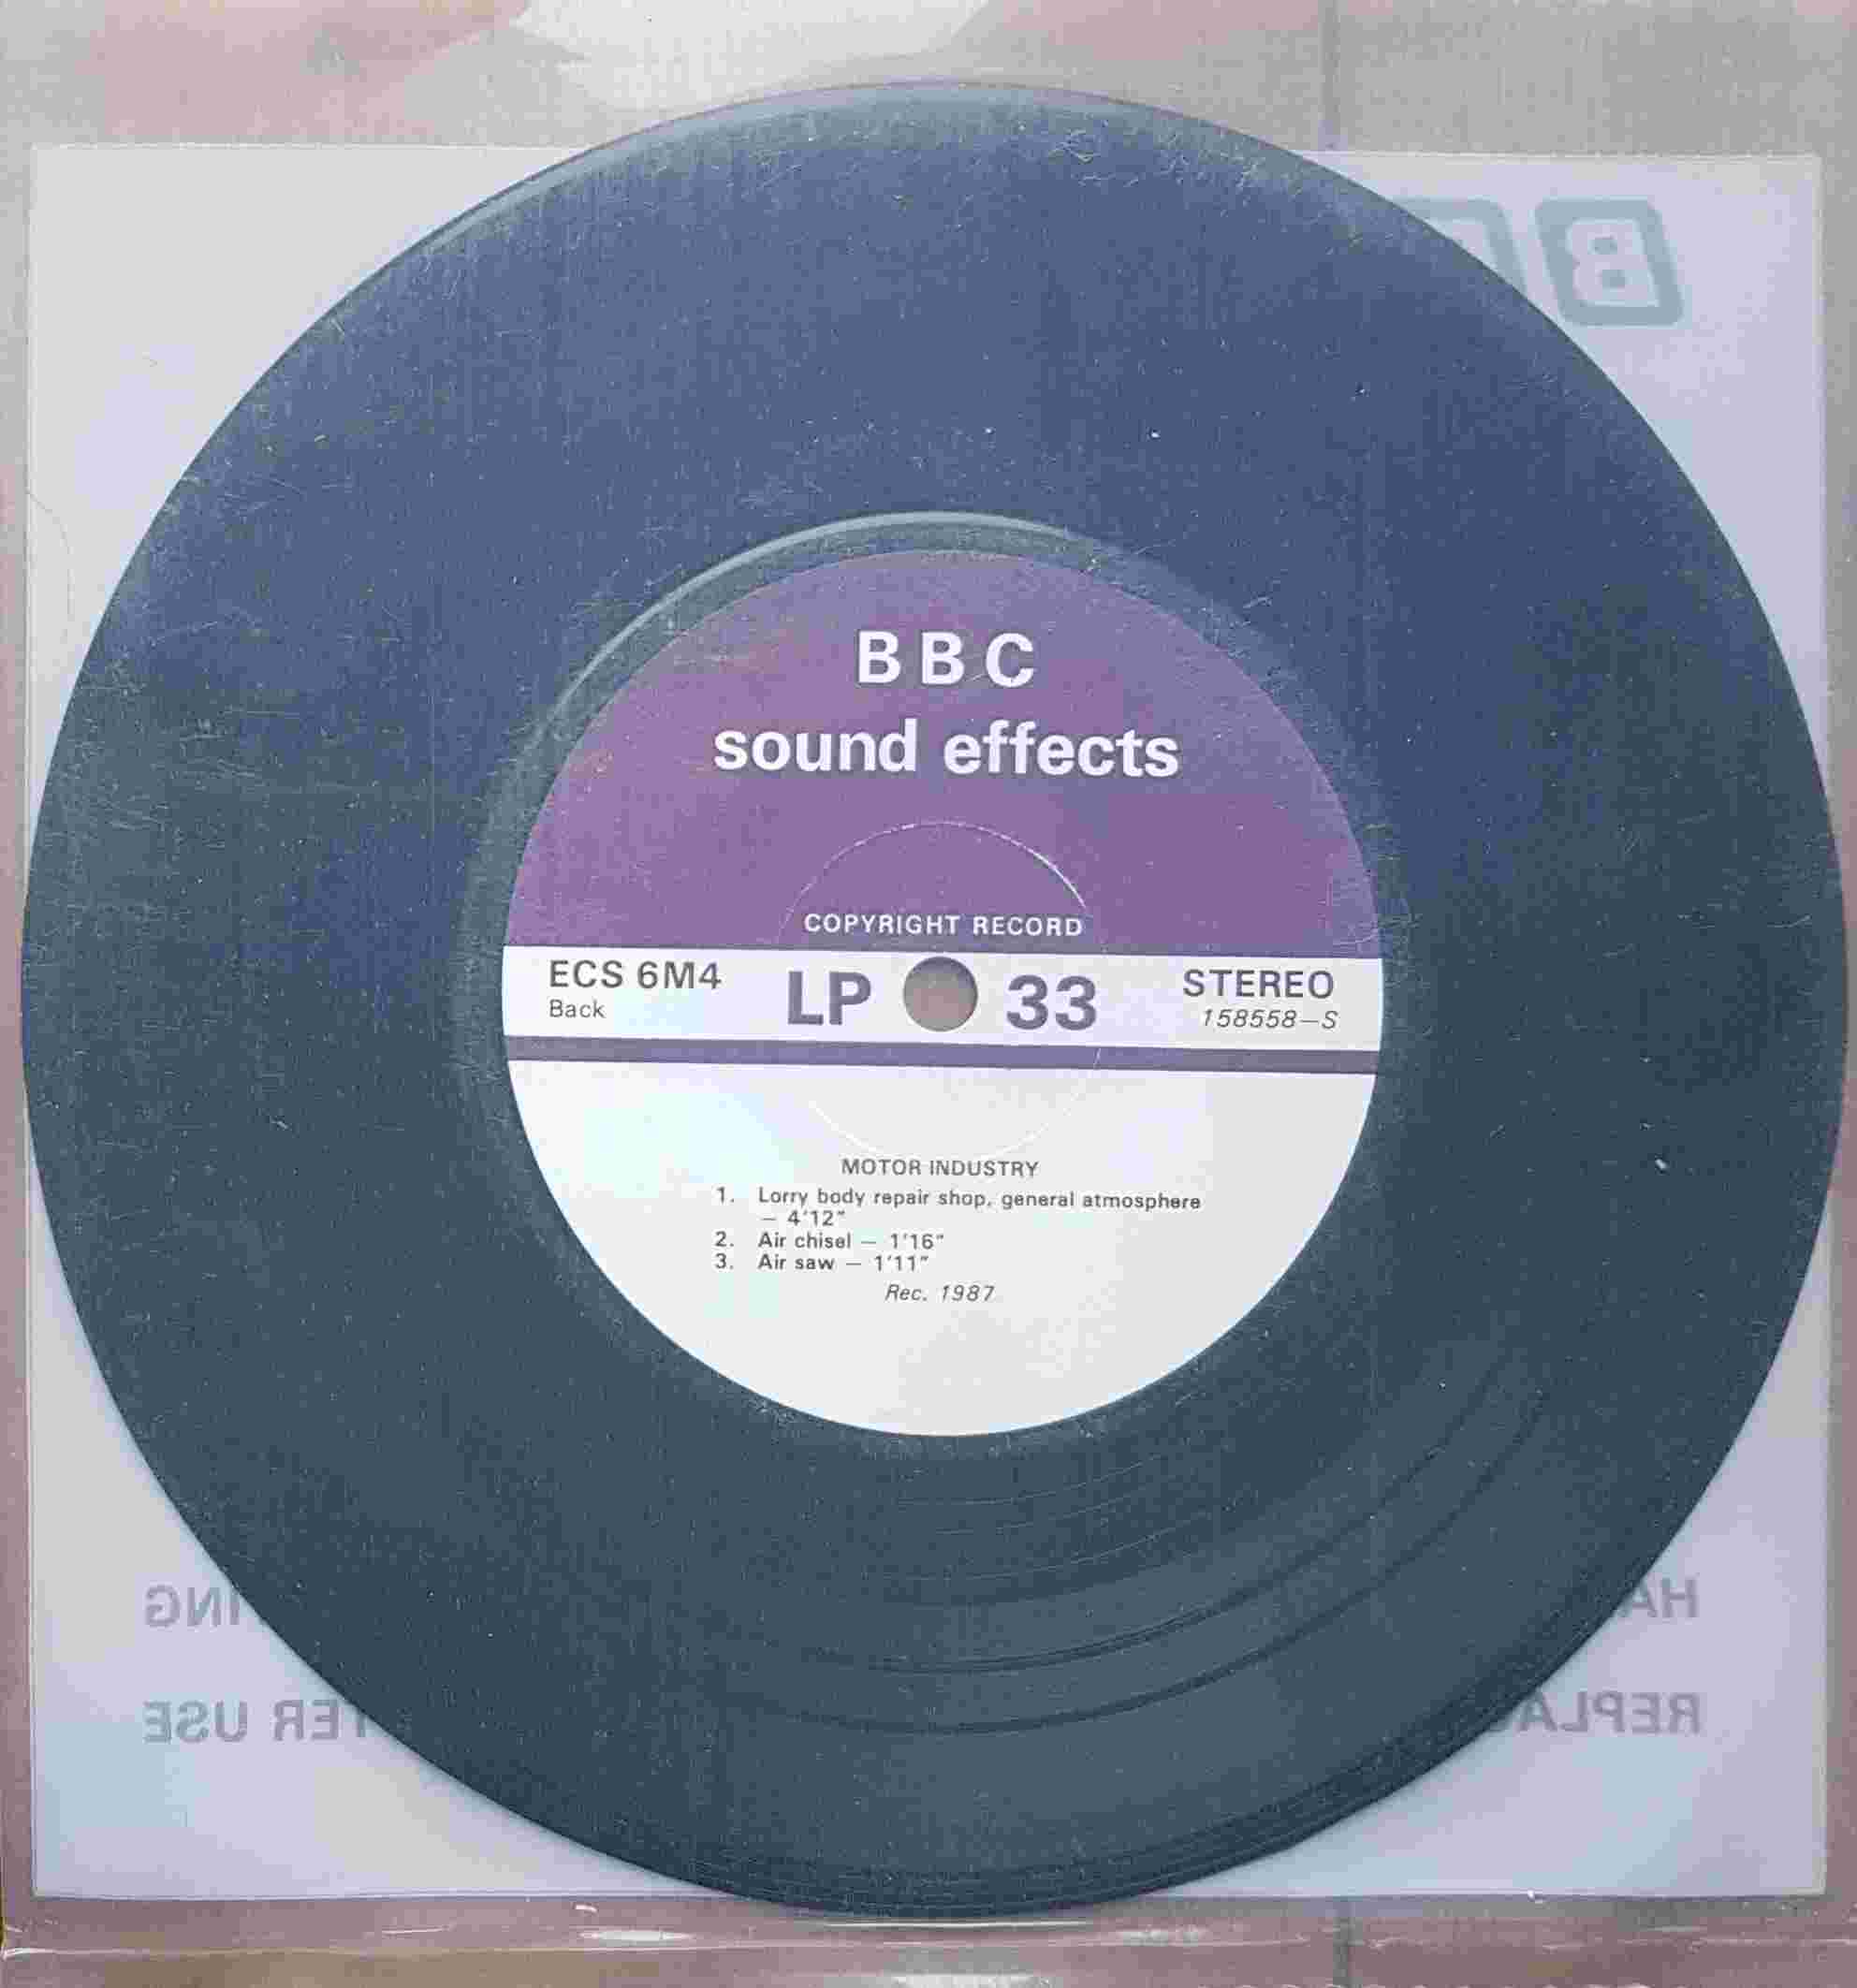 Picture of ECS 6M4 Motor industry by artist Not registered from the BBC records and Tapes library